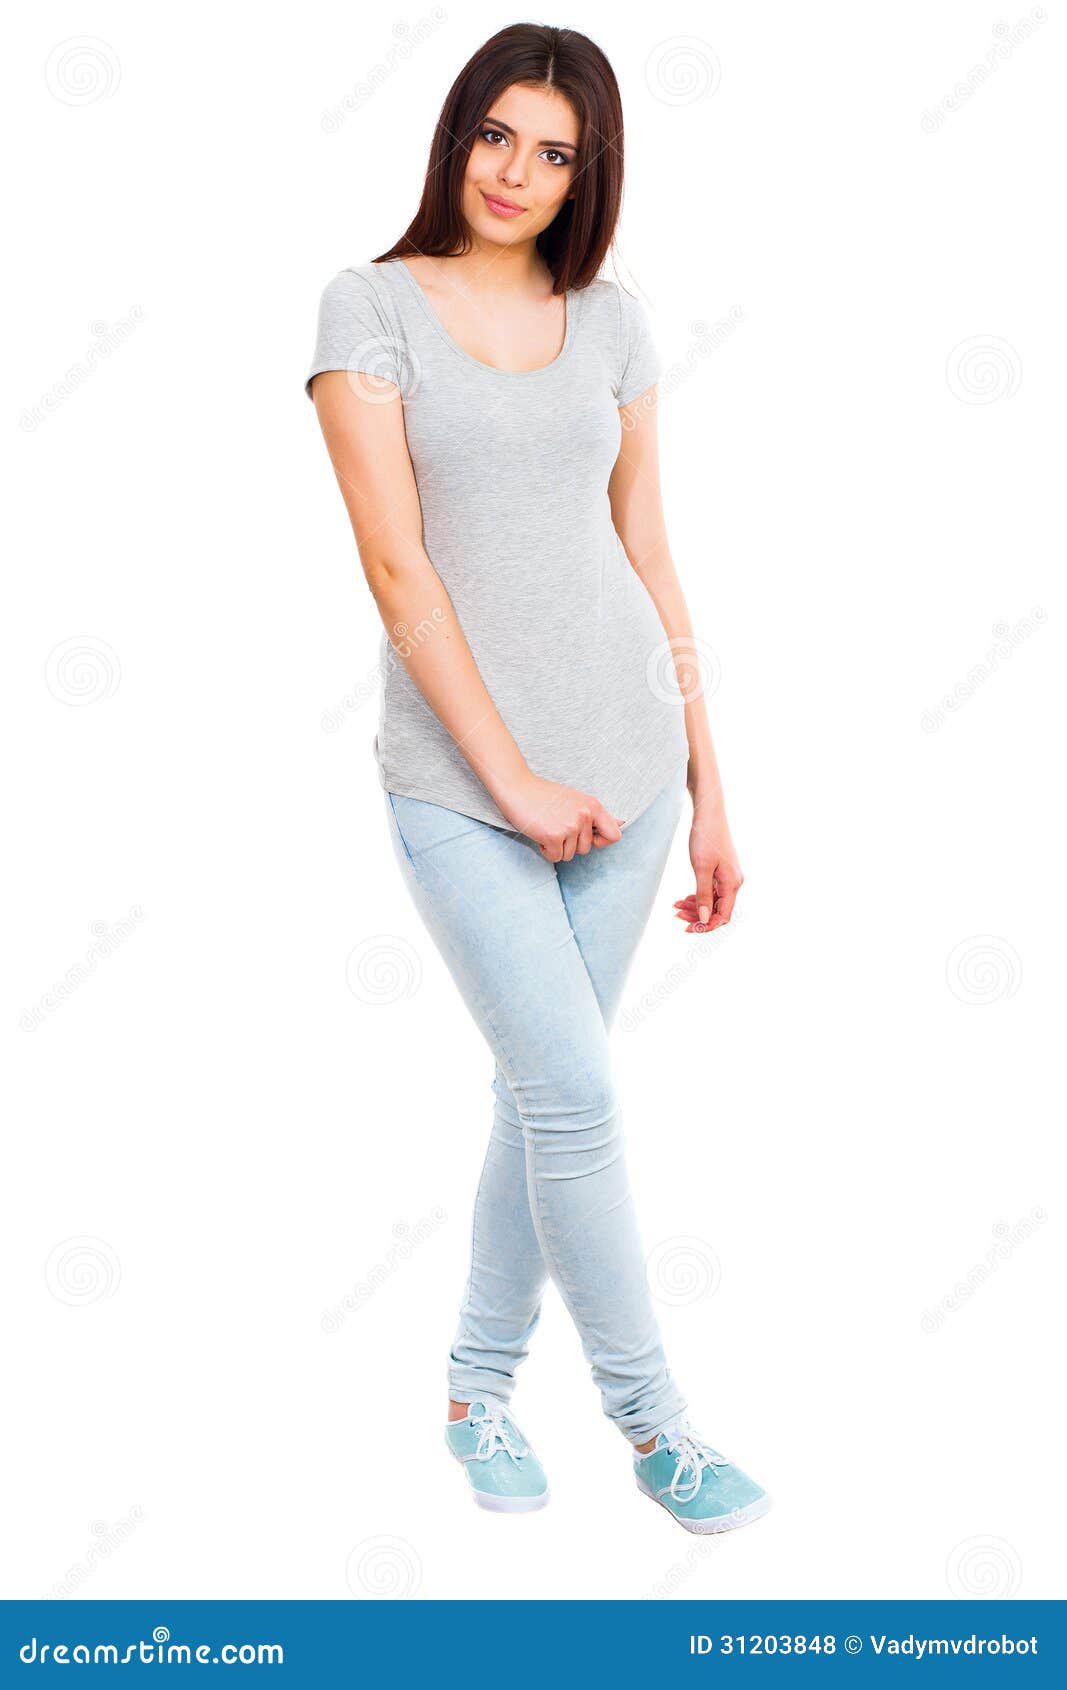 Full Length Portrait of a Pretty Young Woman Stock Photo - Image of ...